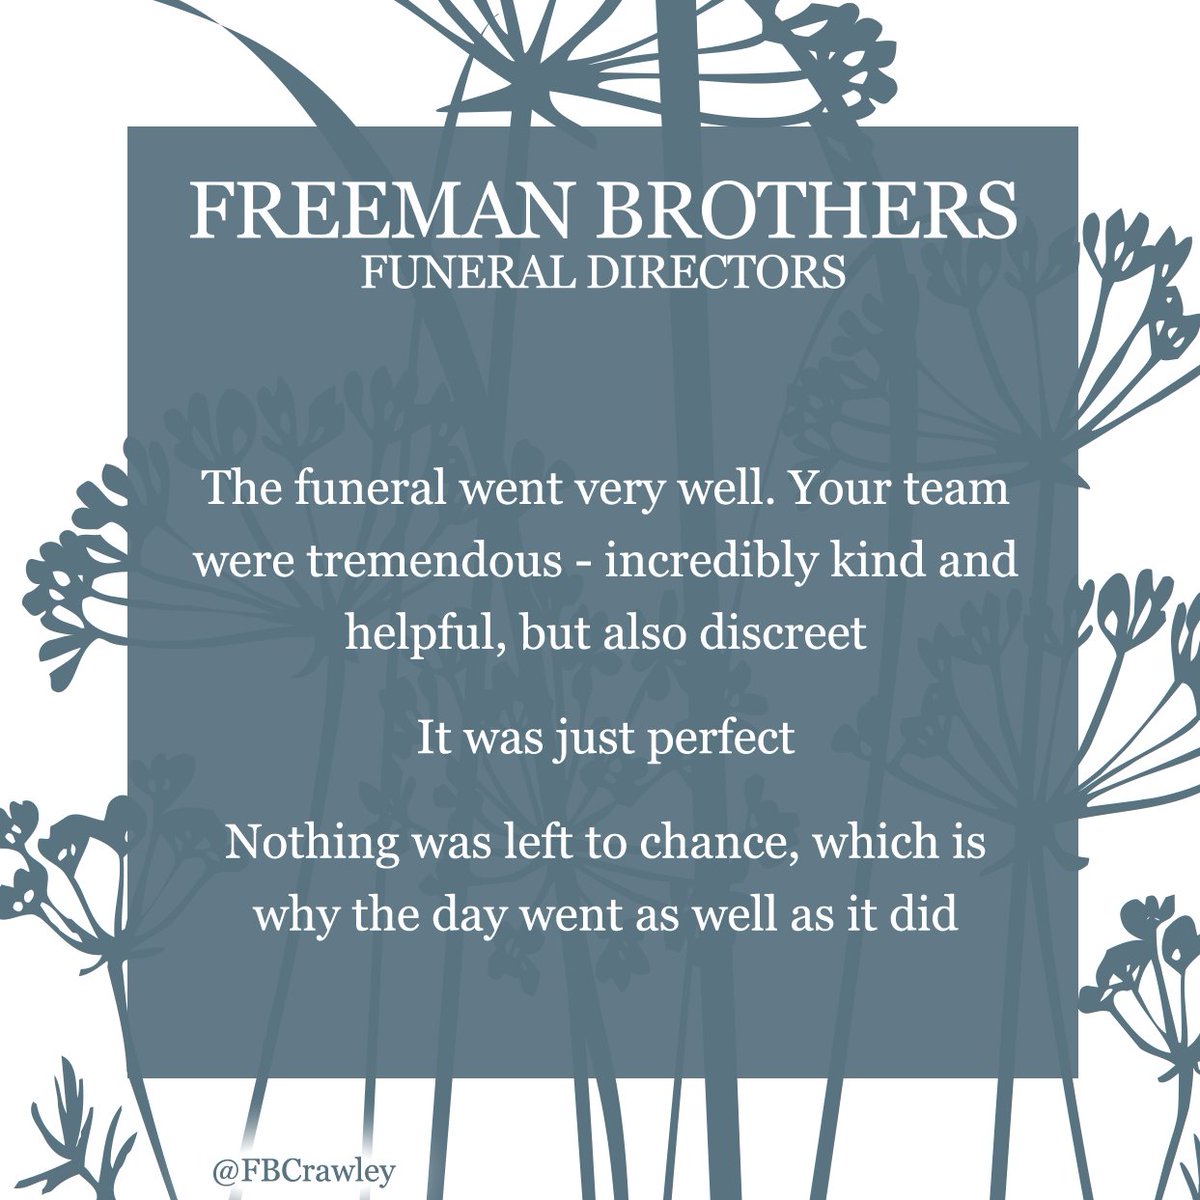 Double or even triple-checking details can sometimes feel unnecessary but, when it comes to a final farewell, we leave no stone unturned. #WhenItMattersMost #BespokeService #FridayFeedback #FeedbackMatters